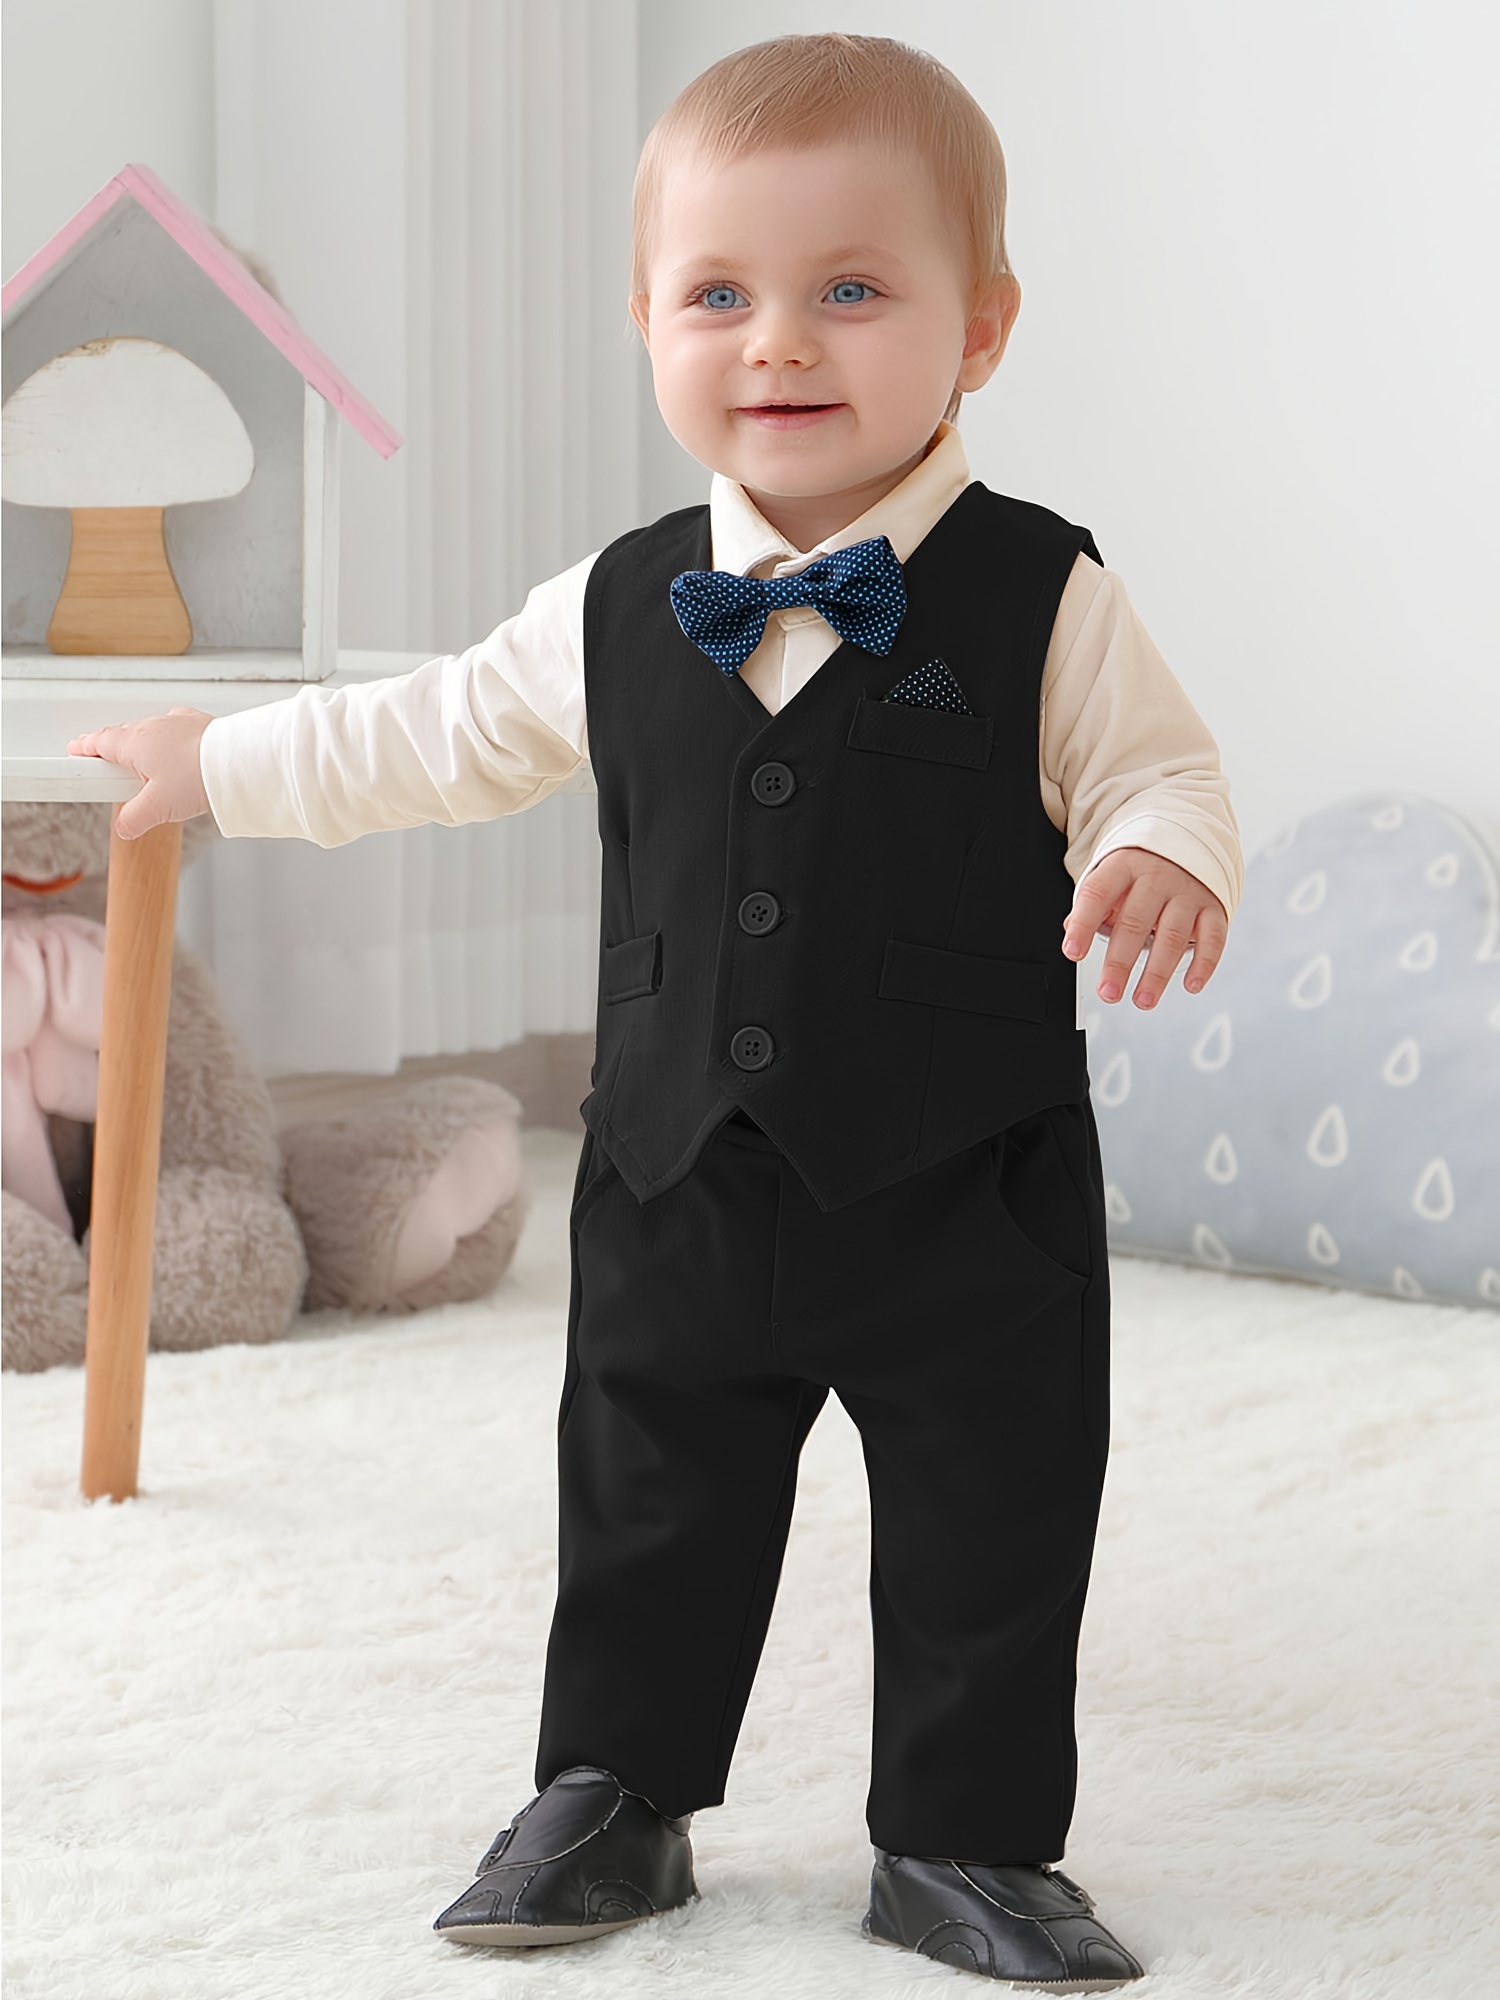 2-piece Toddler Boy 100% Cotton Stripe Faux-two Long-sleeve Top and Black Pants Set (Tie is included)